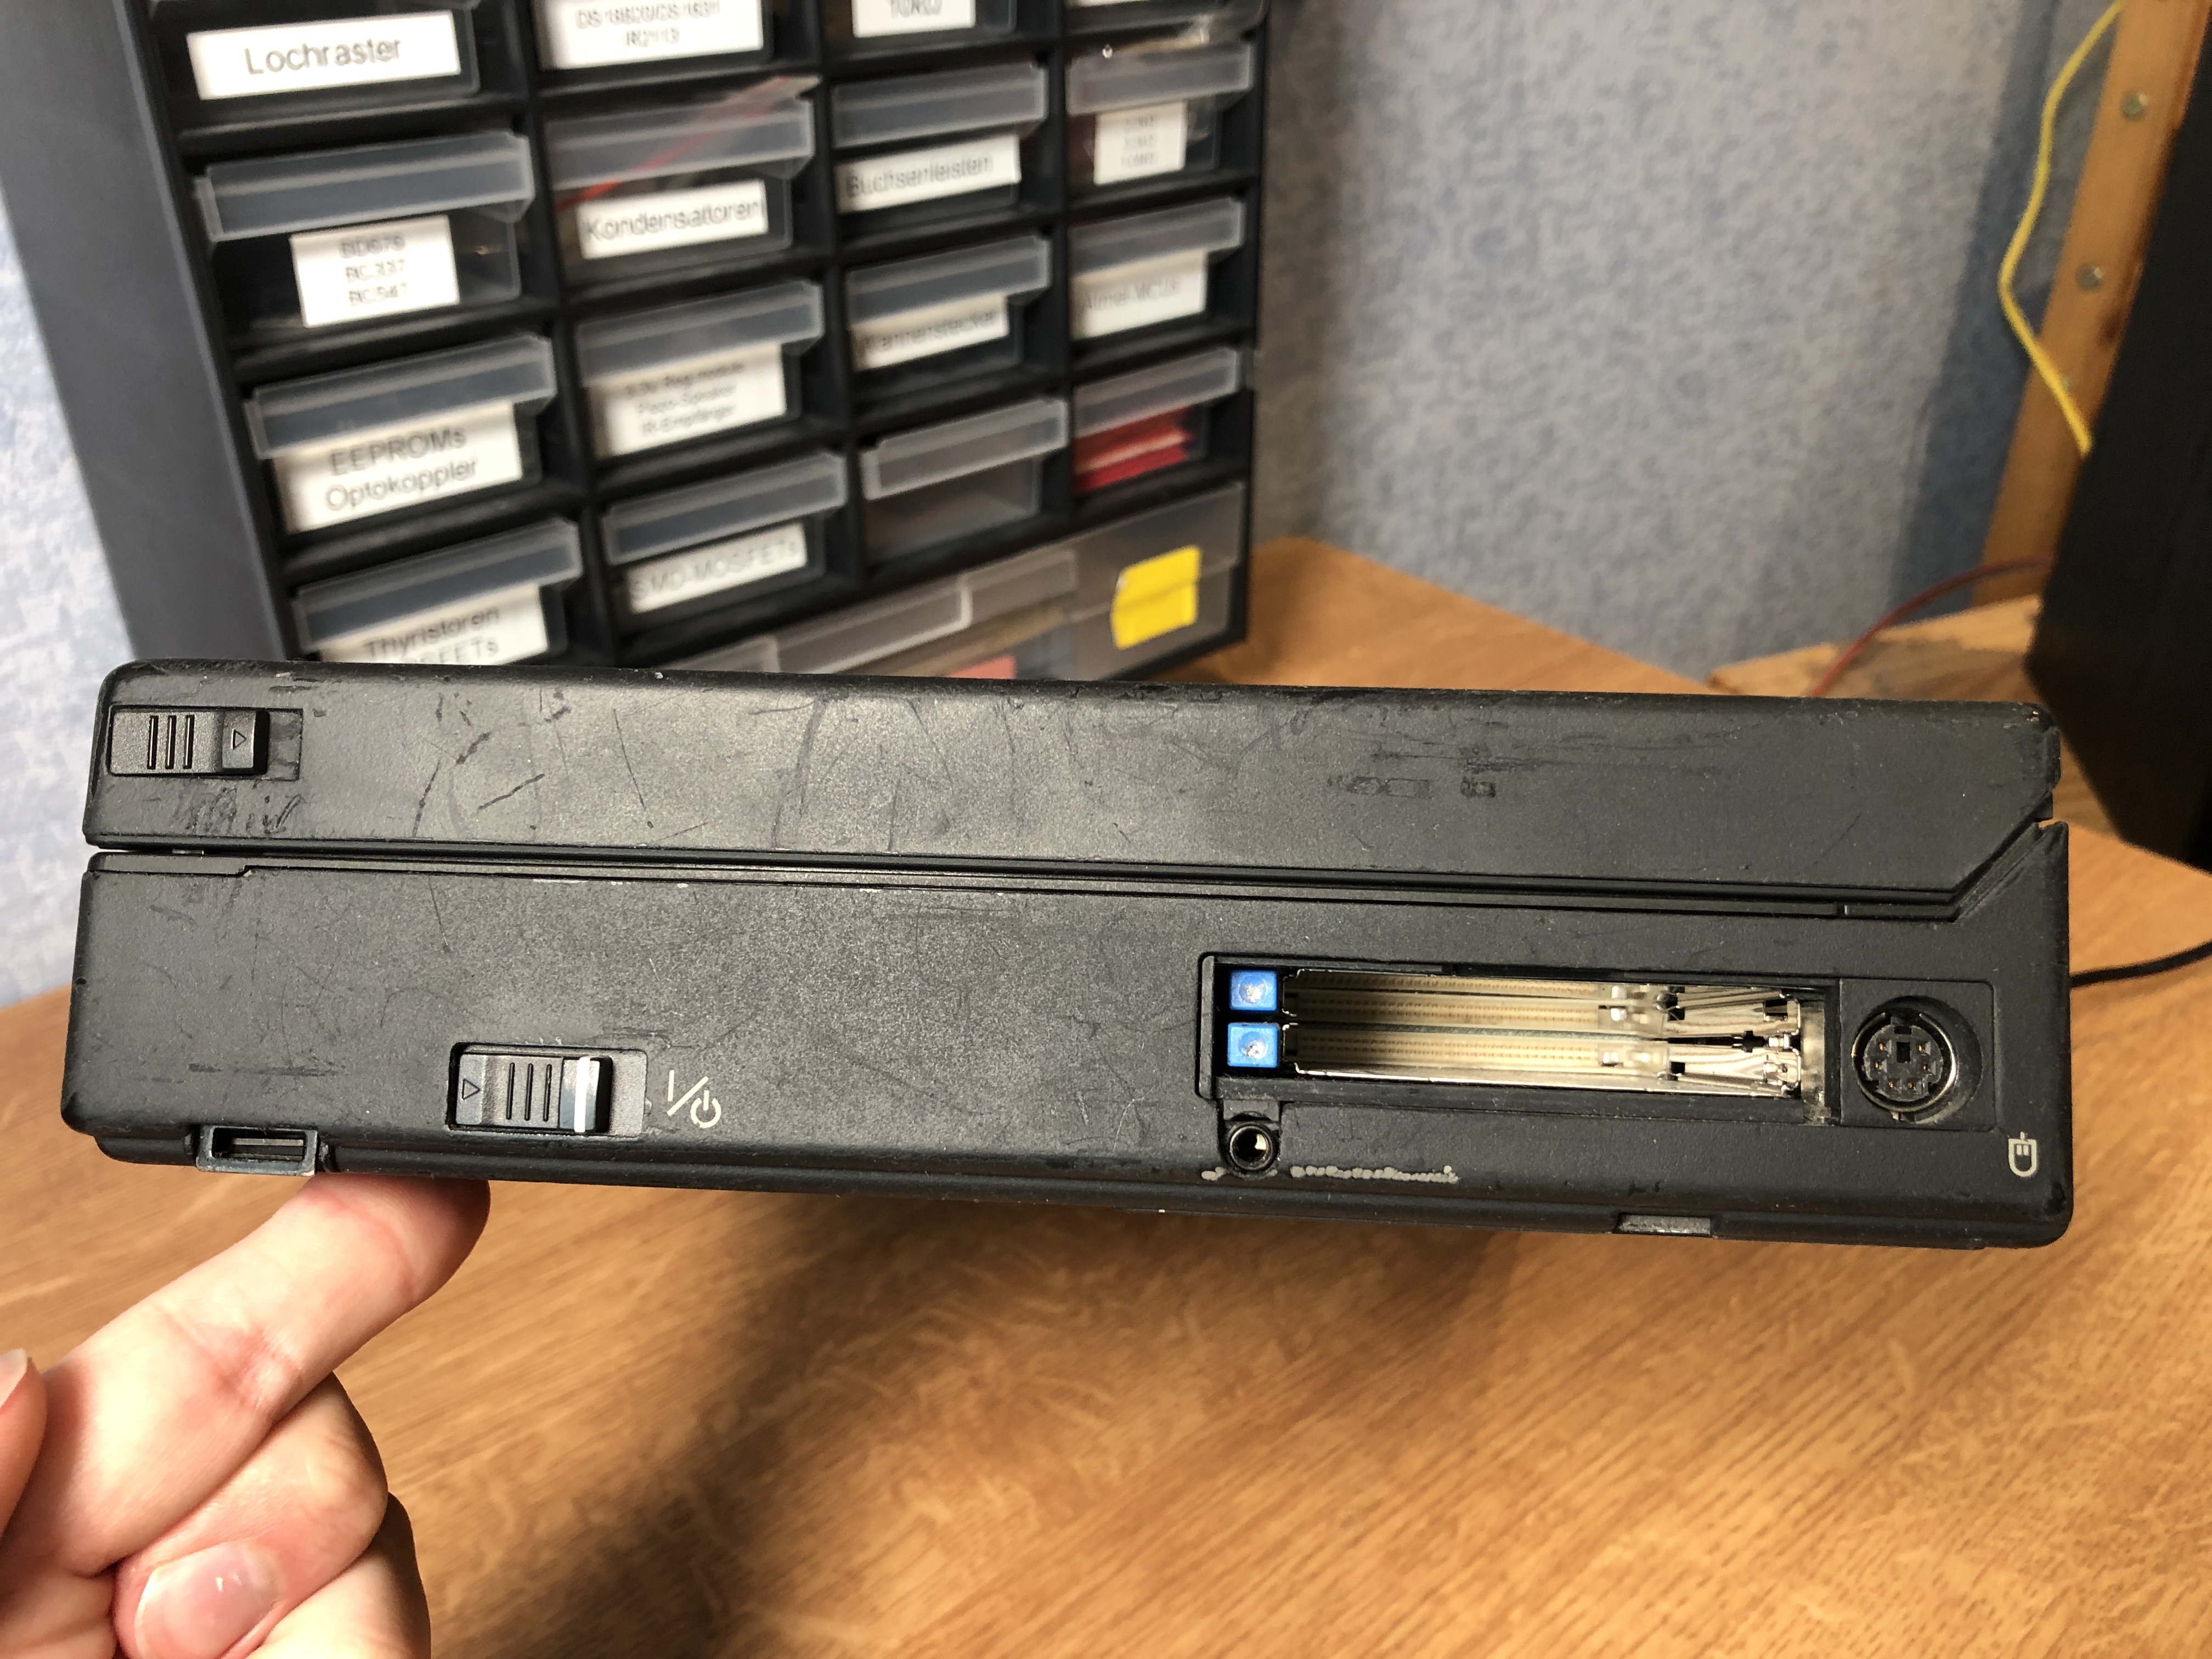 Connectors on the right side of the ThinkPad 820, PCMCIA, PS/2, power switch